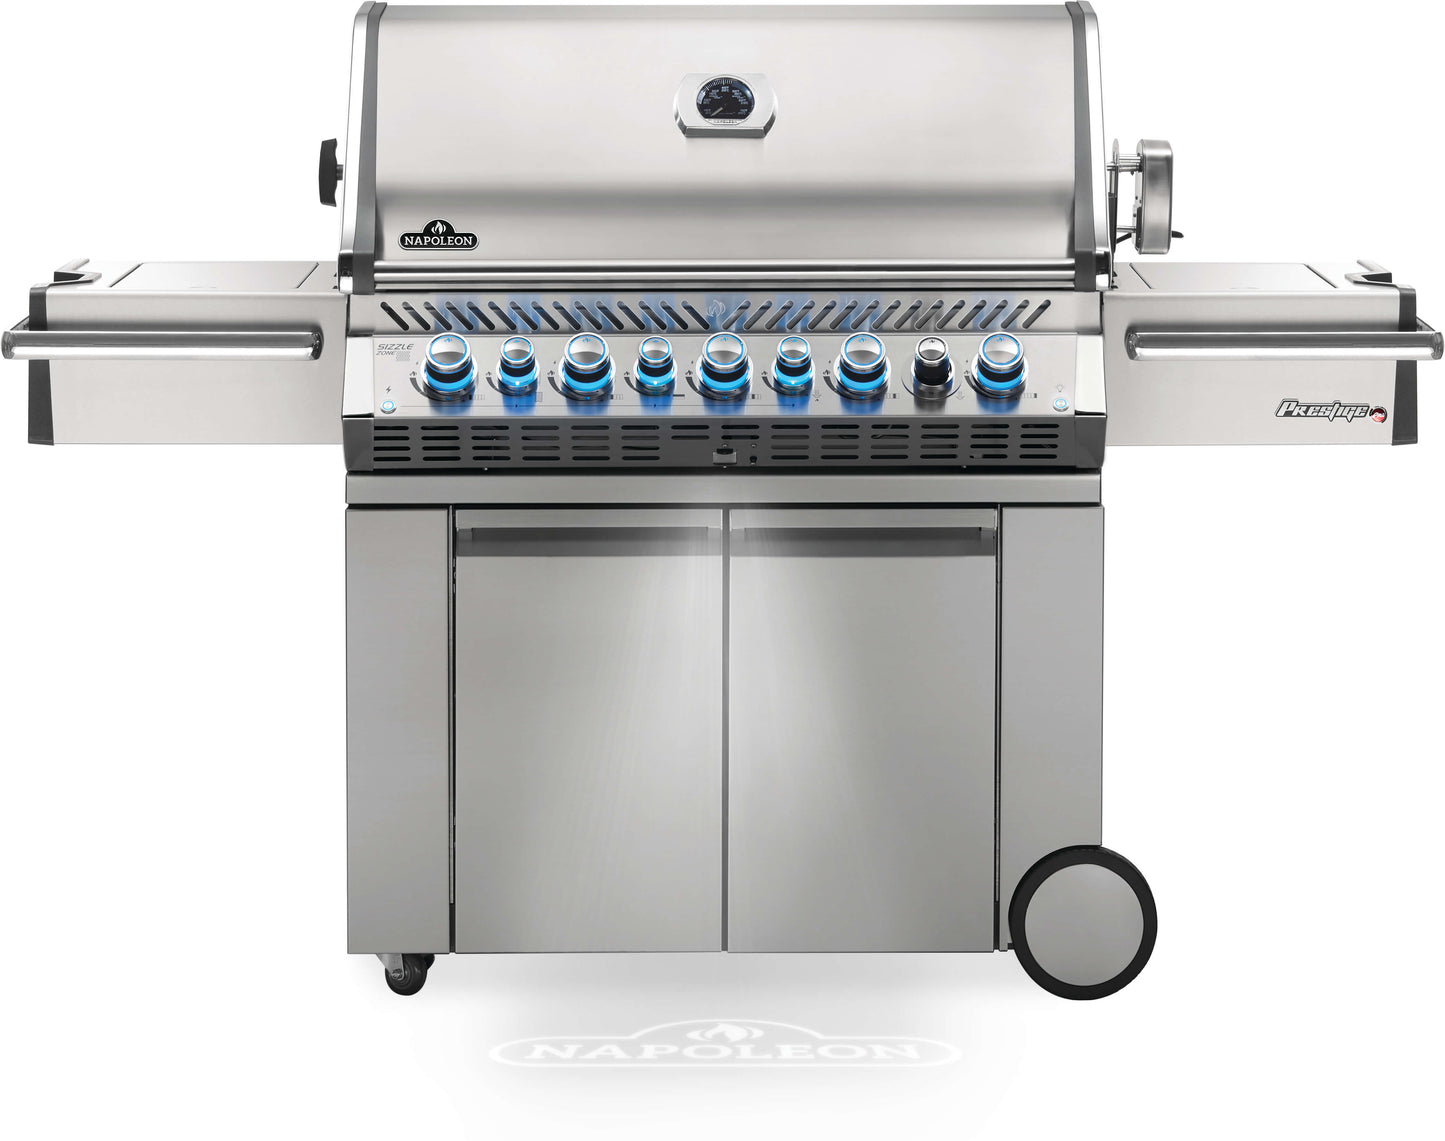 Prestige PRO™ 665 Grill with Infrared Rear and Side Burners